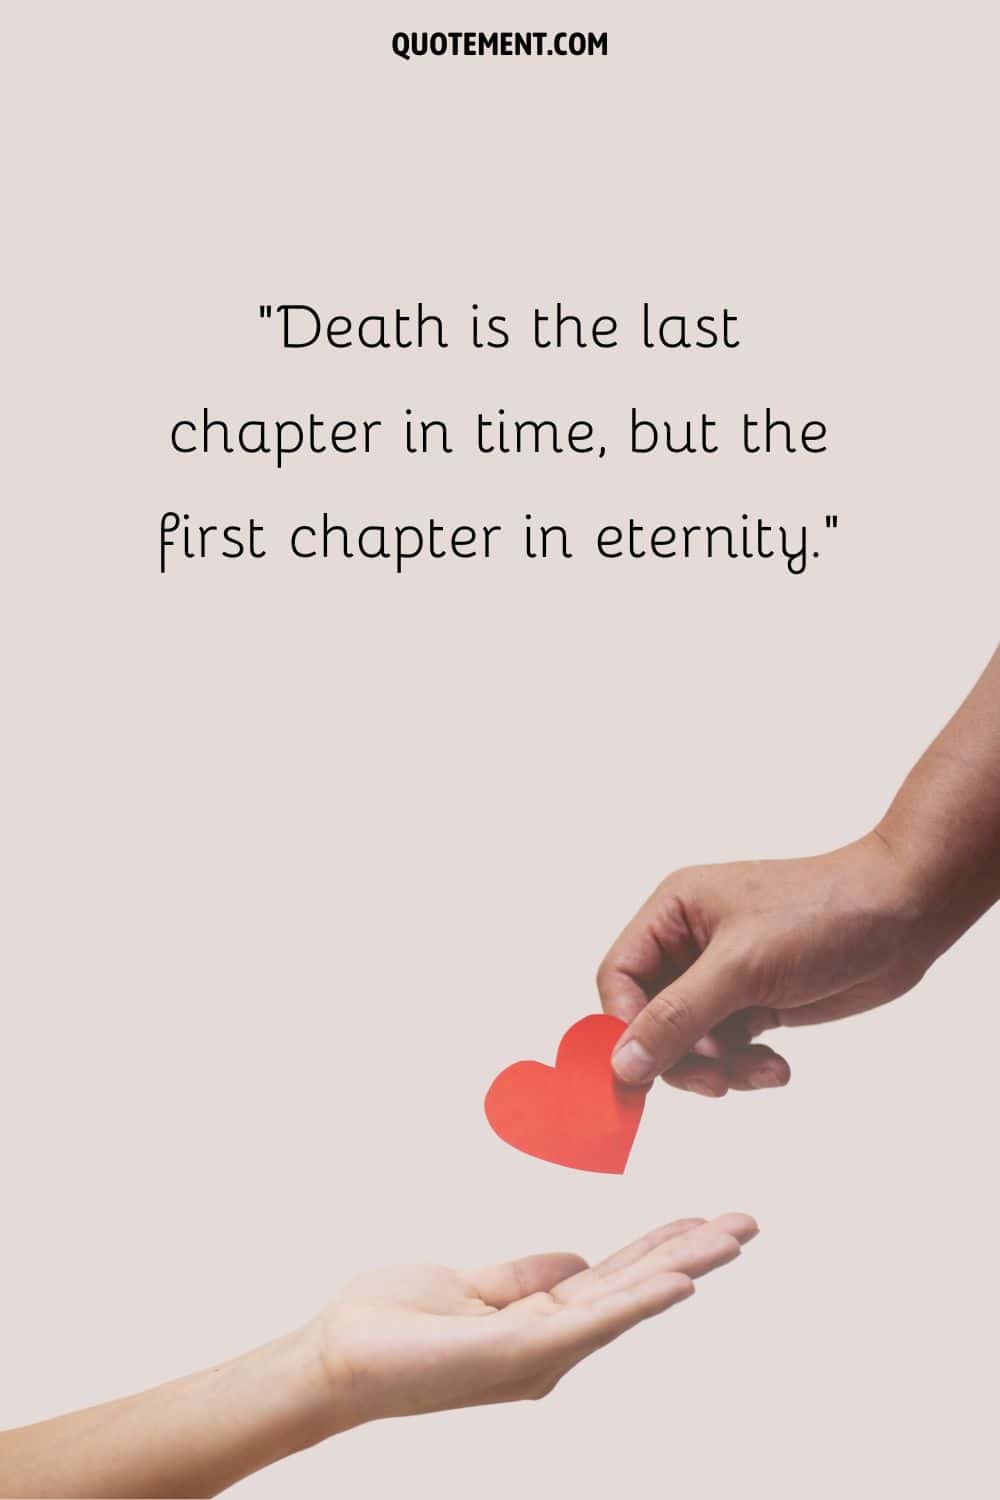 Death is the last chapter in time, but the first chapter in eternity.